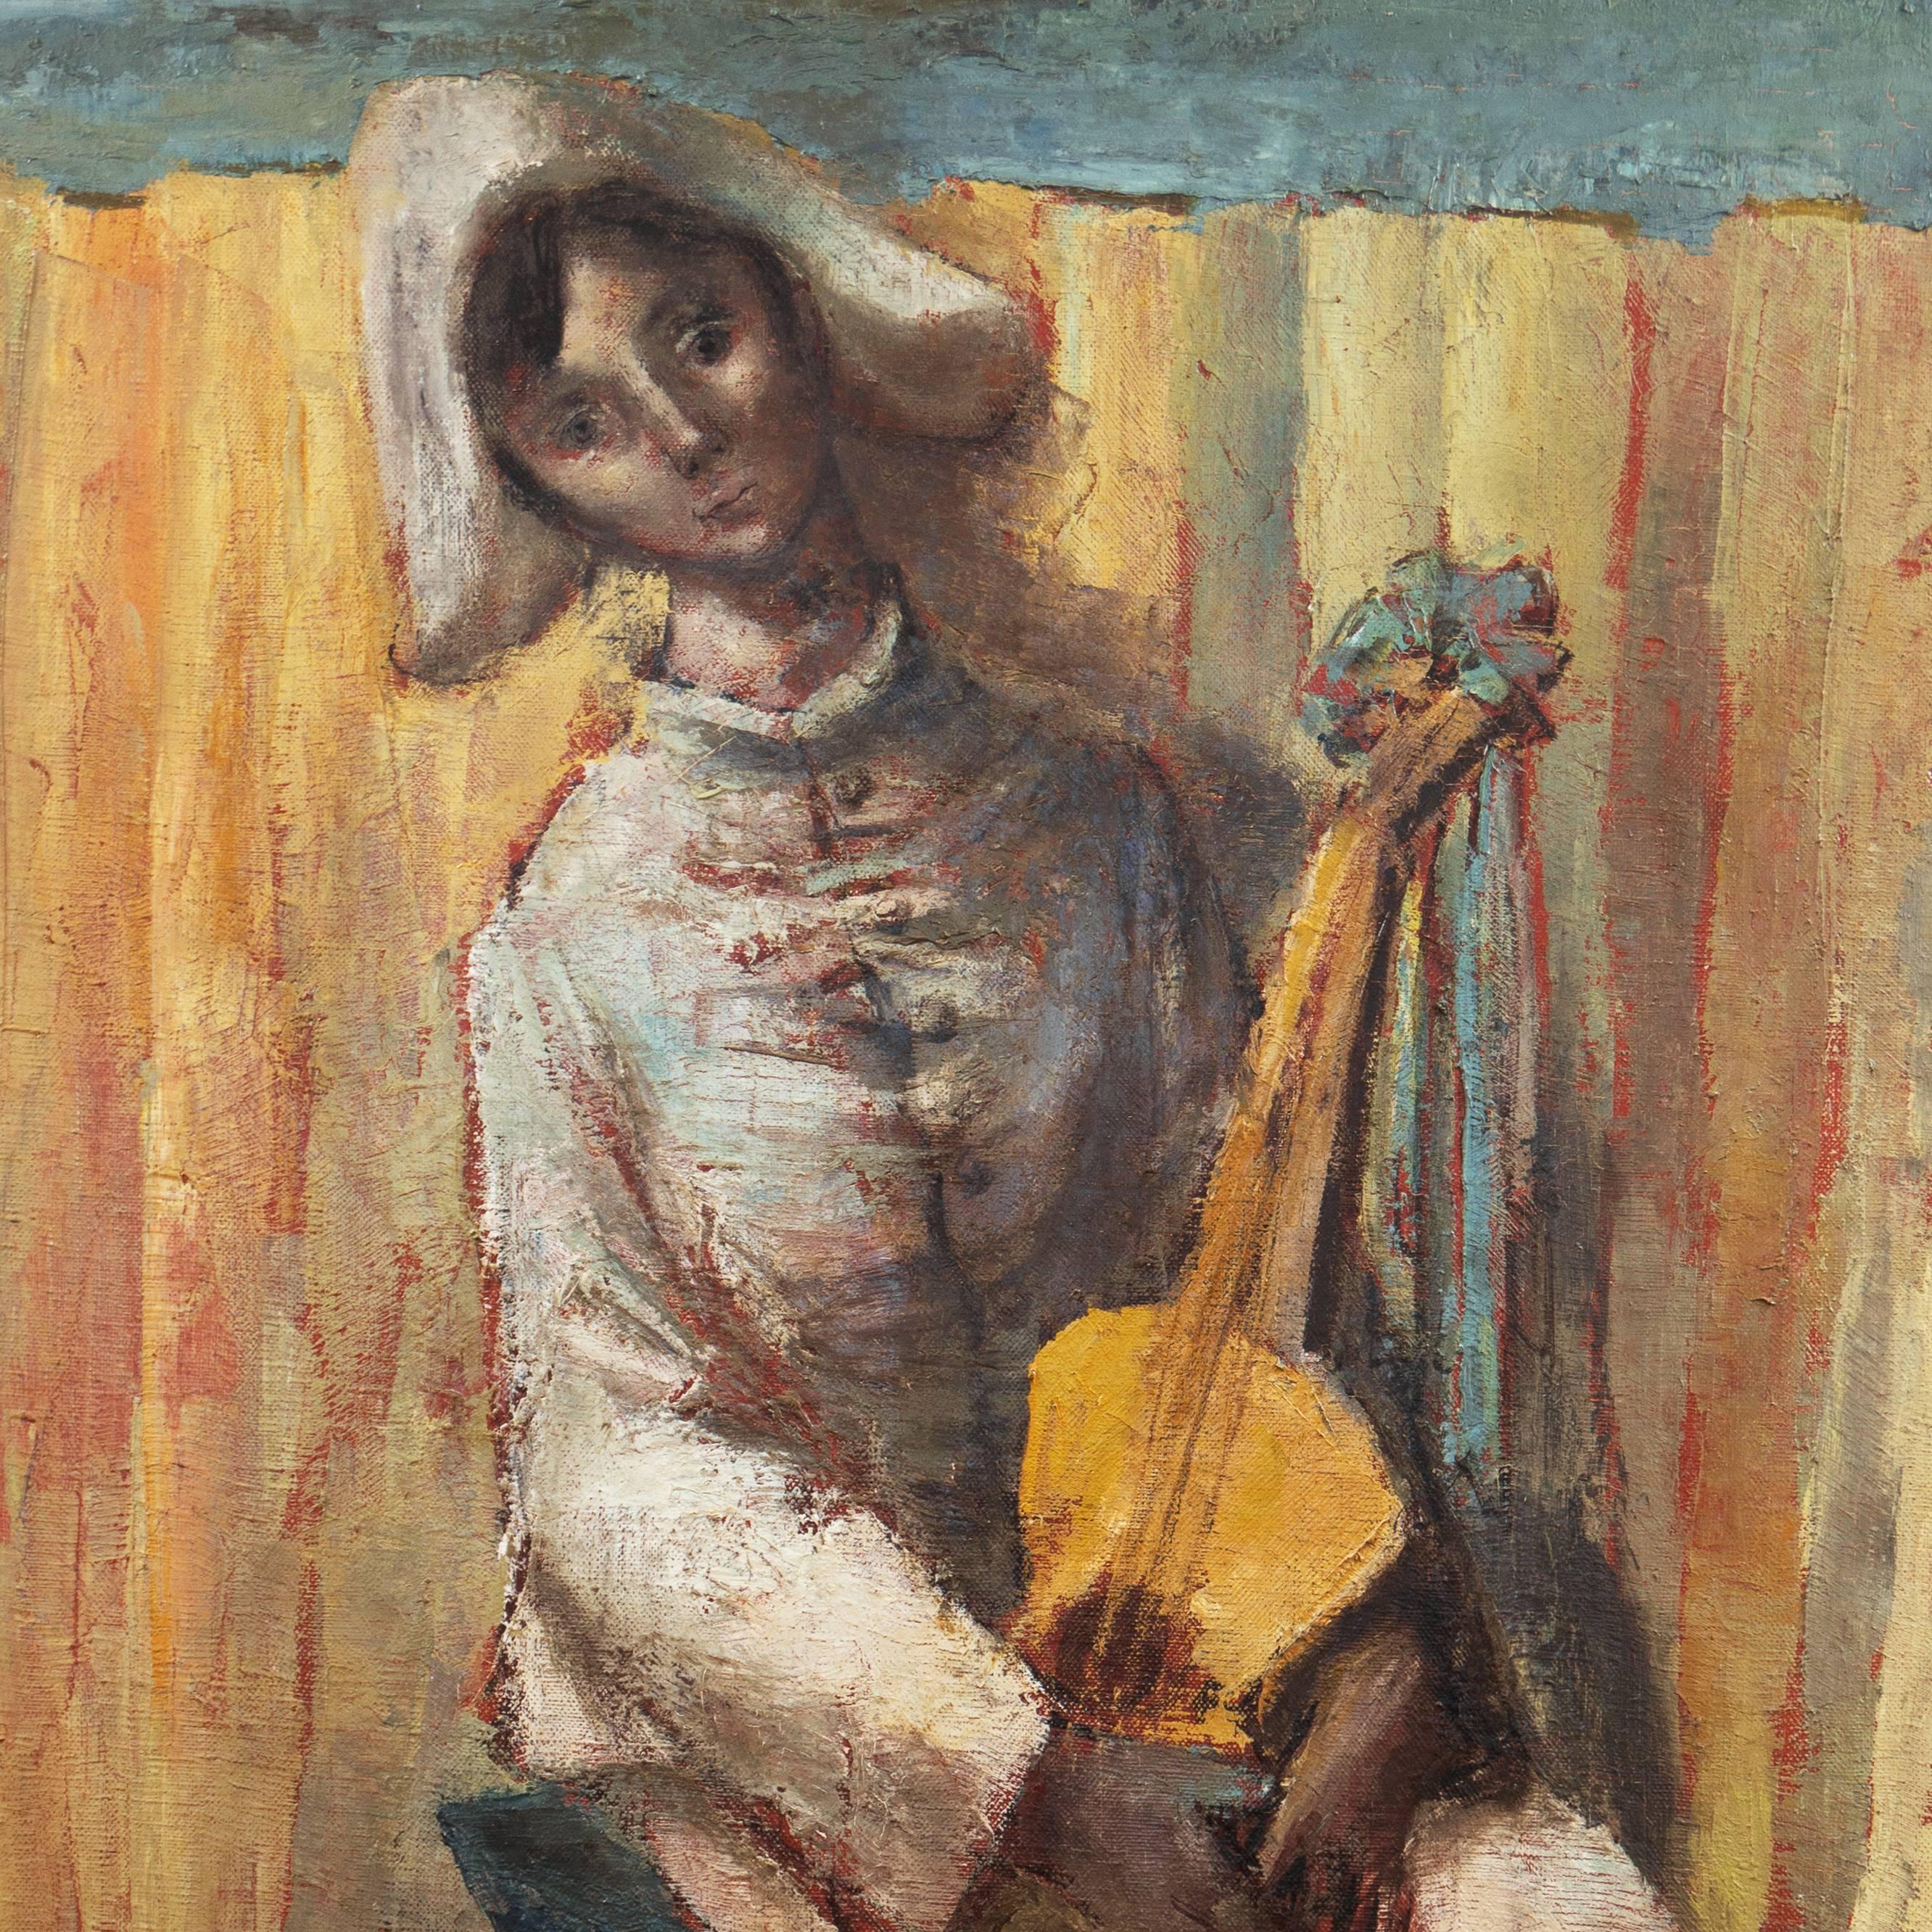 Musician in Costume - Painting by Jose Pico